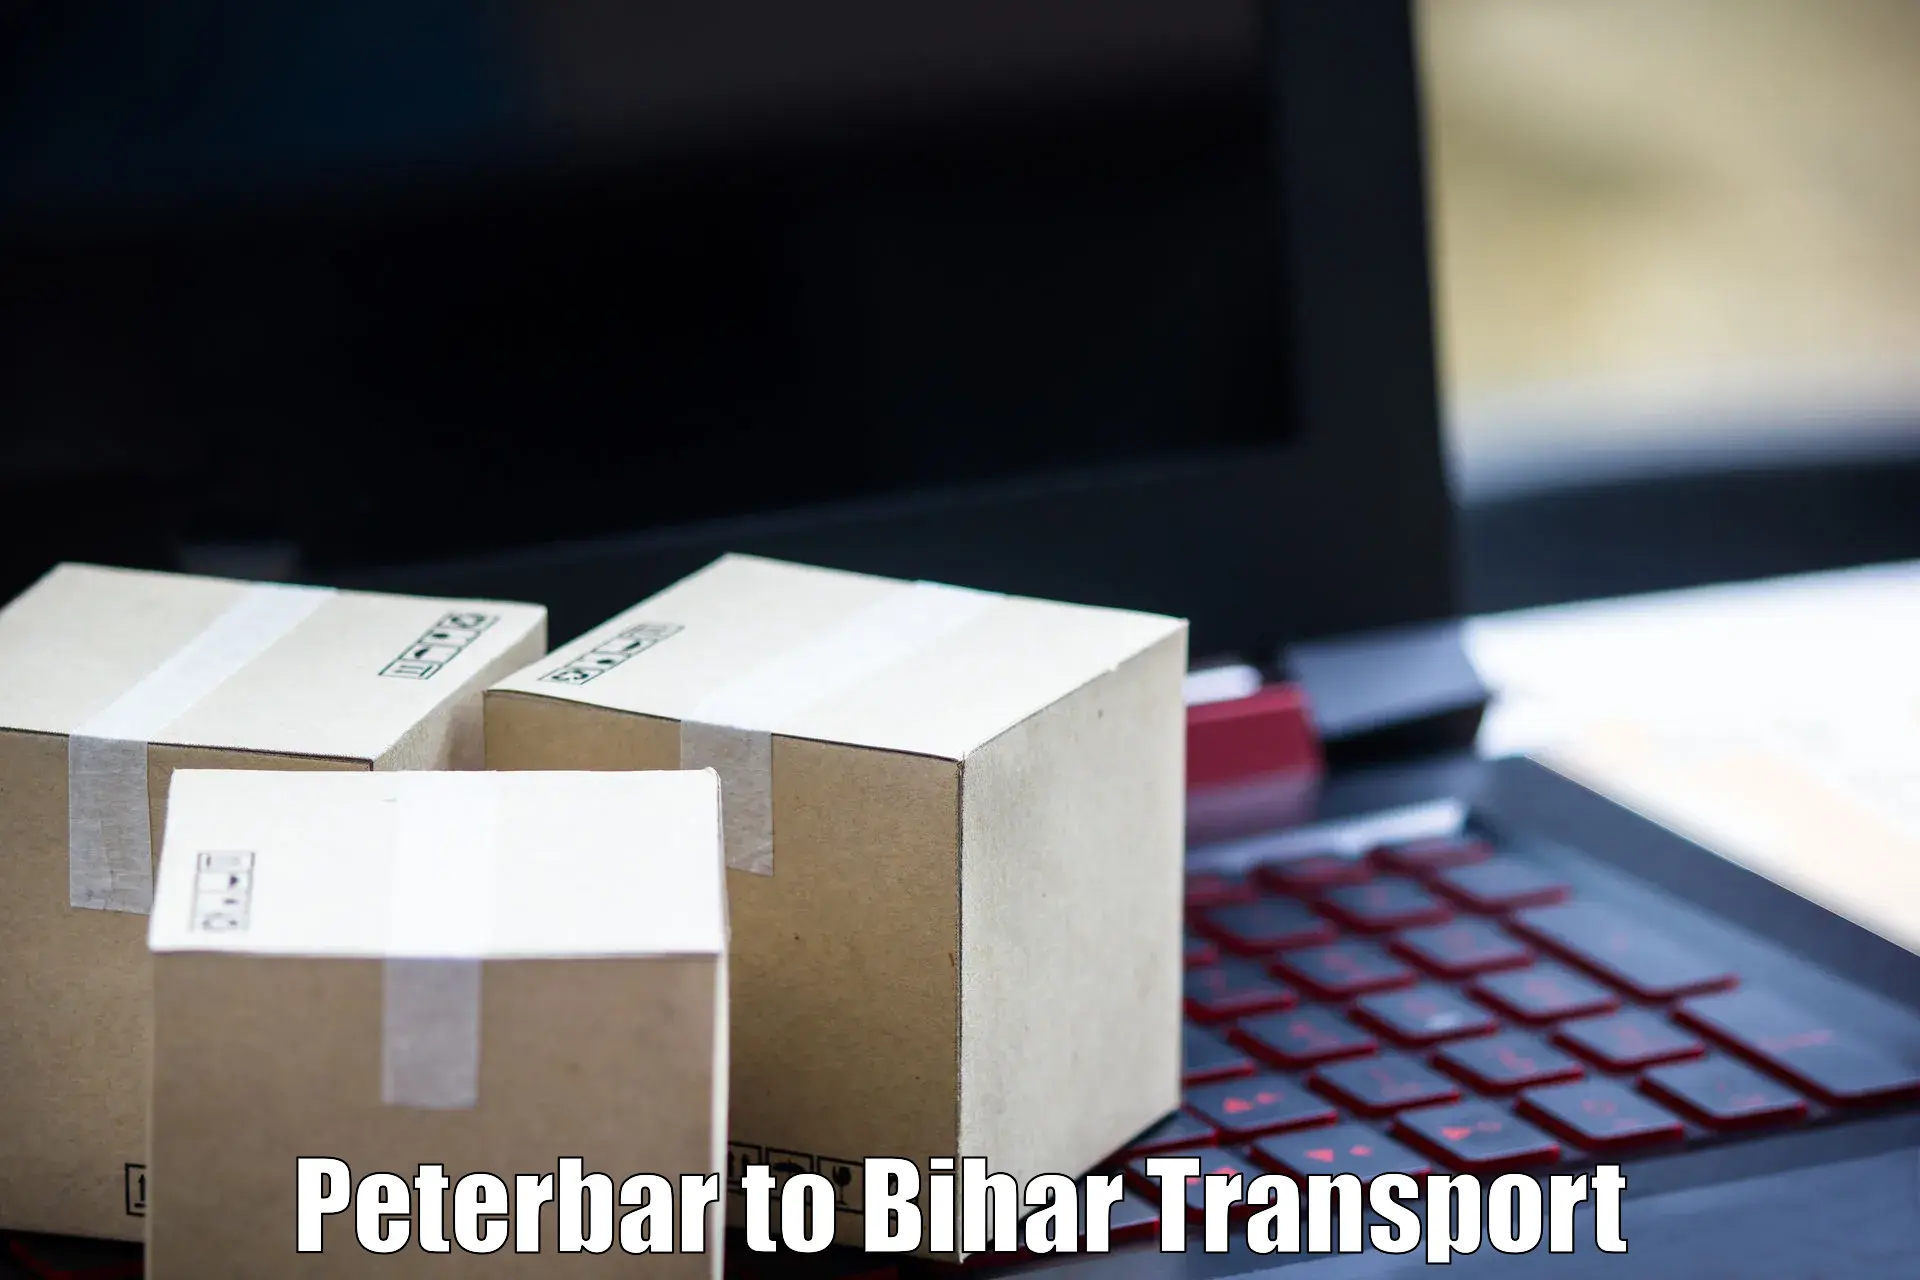 Pick up transport service Peterbar to Mohammadpur